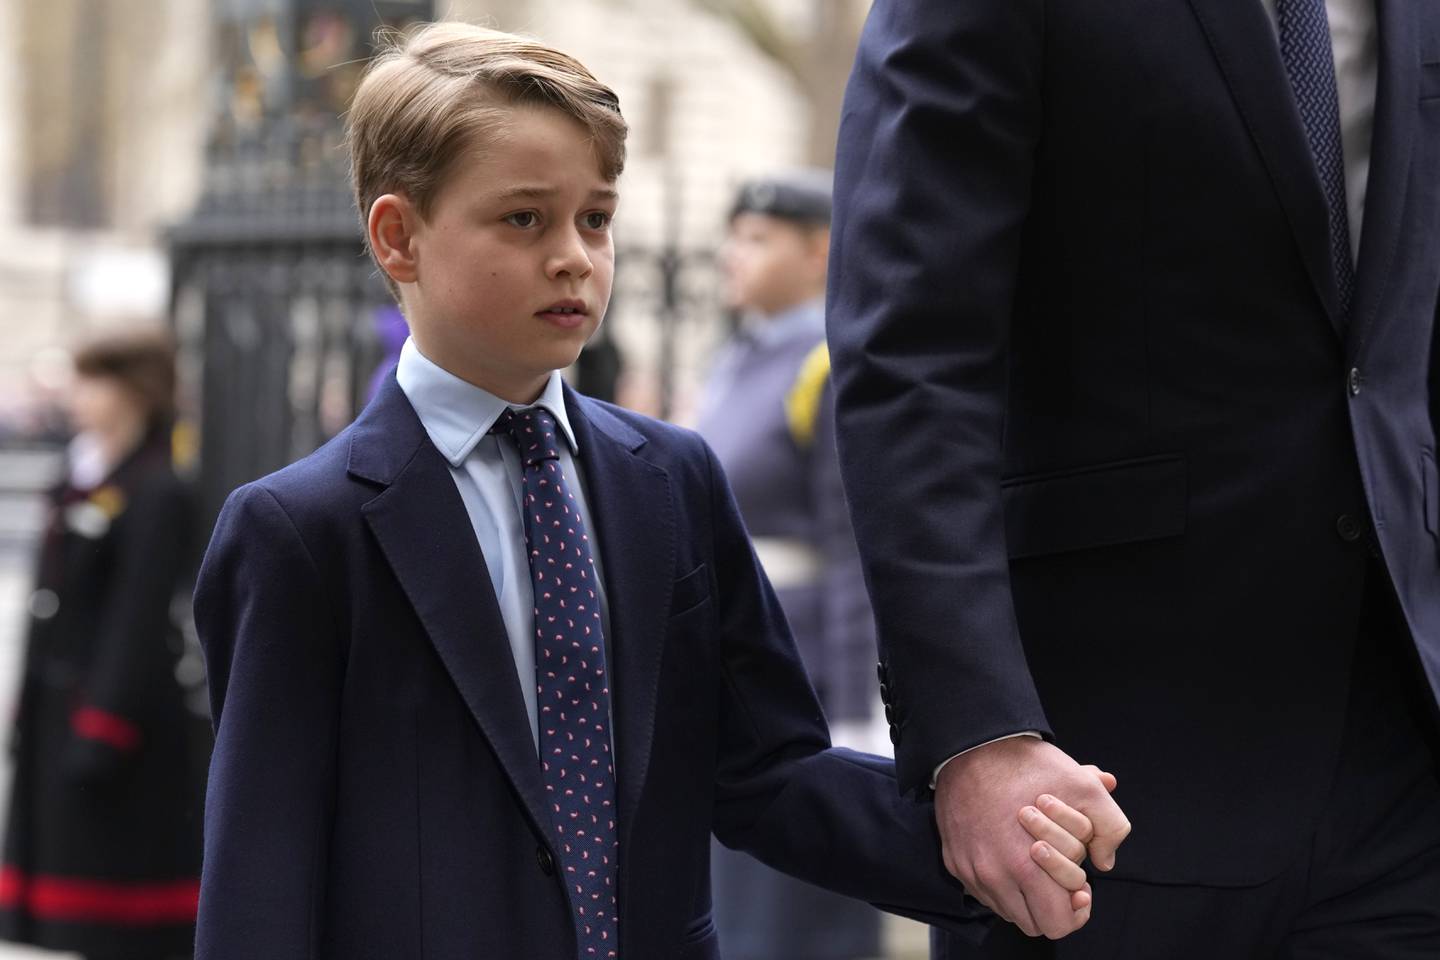 Prince George holds the hand of his father Prince William as they arrive to attend a service of thanksgiving for the life of Prince Philip, Duke of Edinburgh. AP 